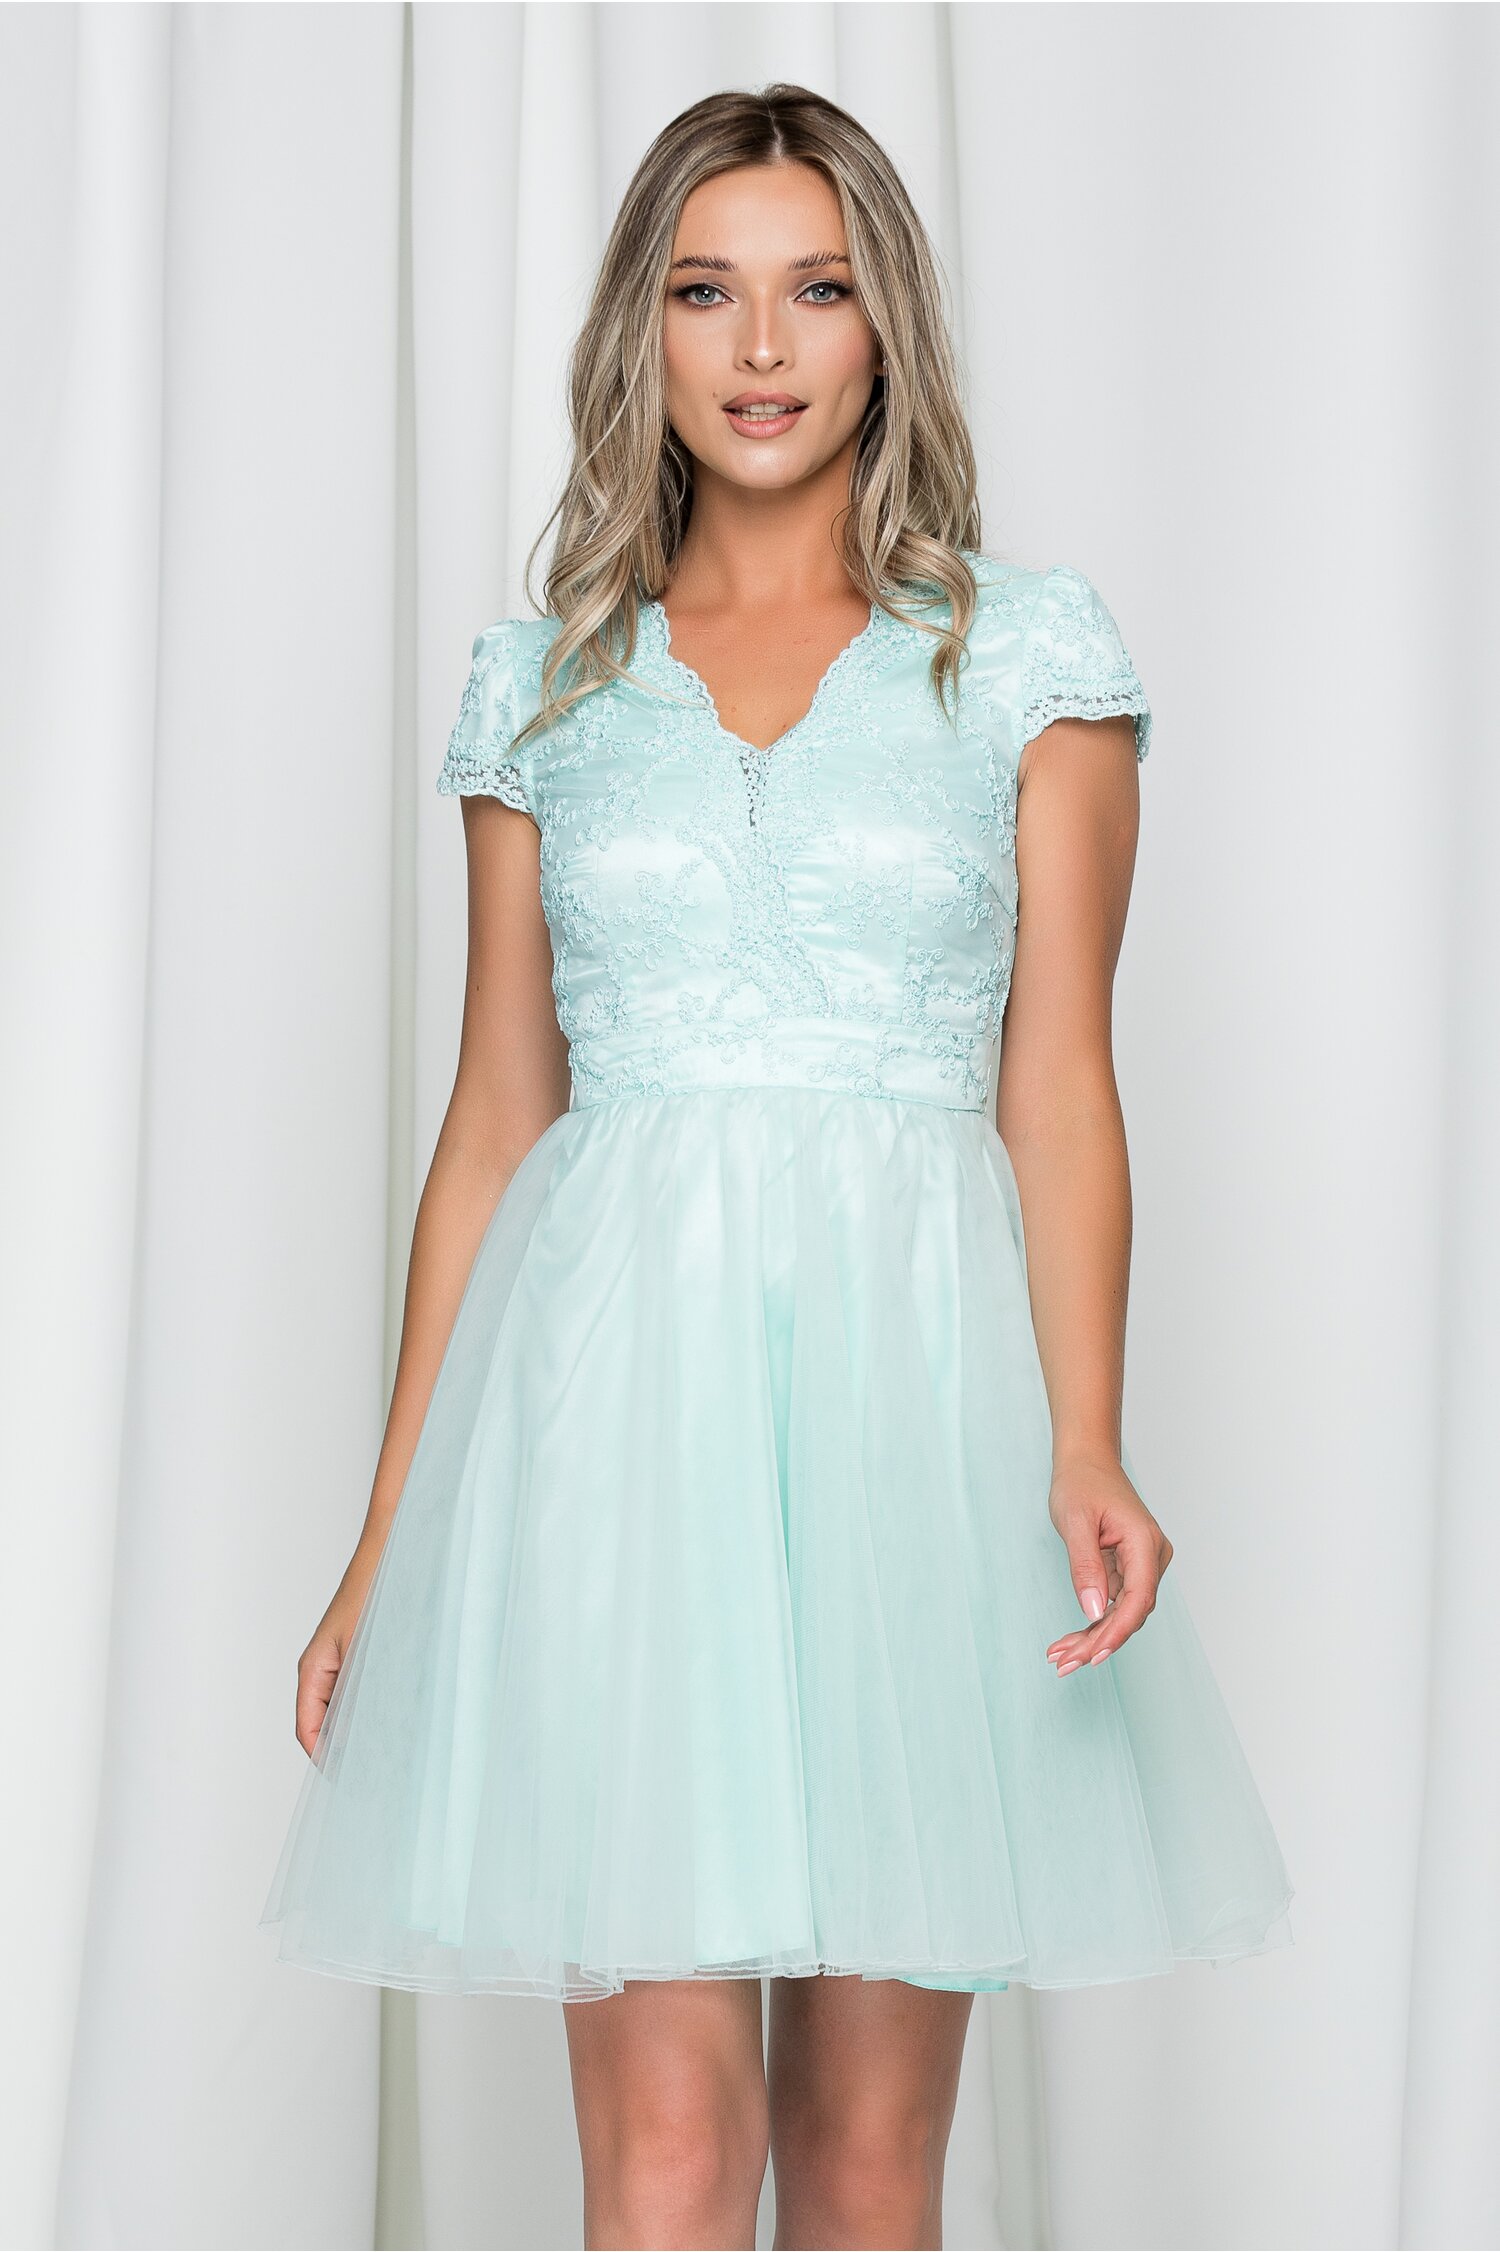 Rochie Ella Collection Julia verde mint din tulle si broderie dyfashion.ro imagine 2022 13clothing.ro